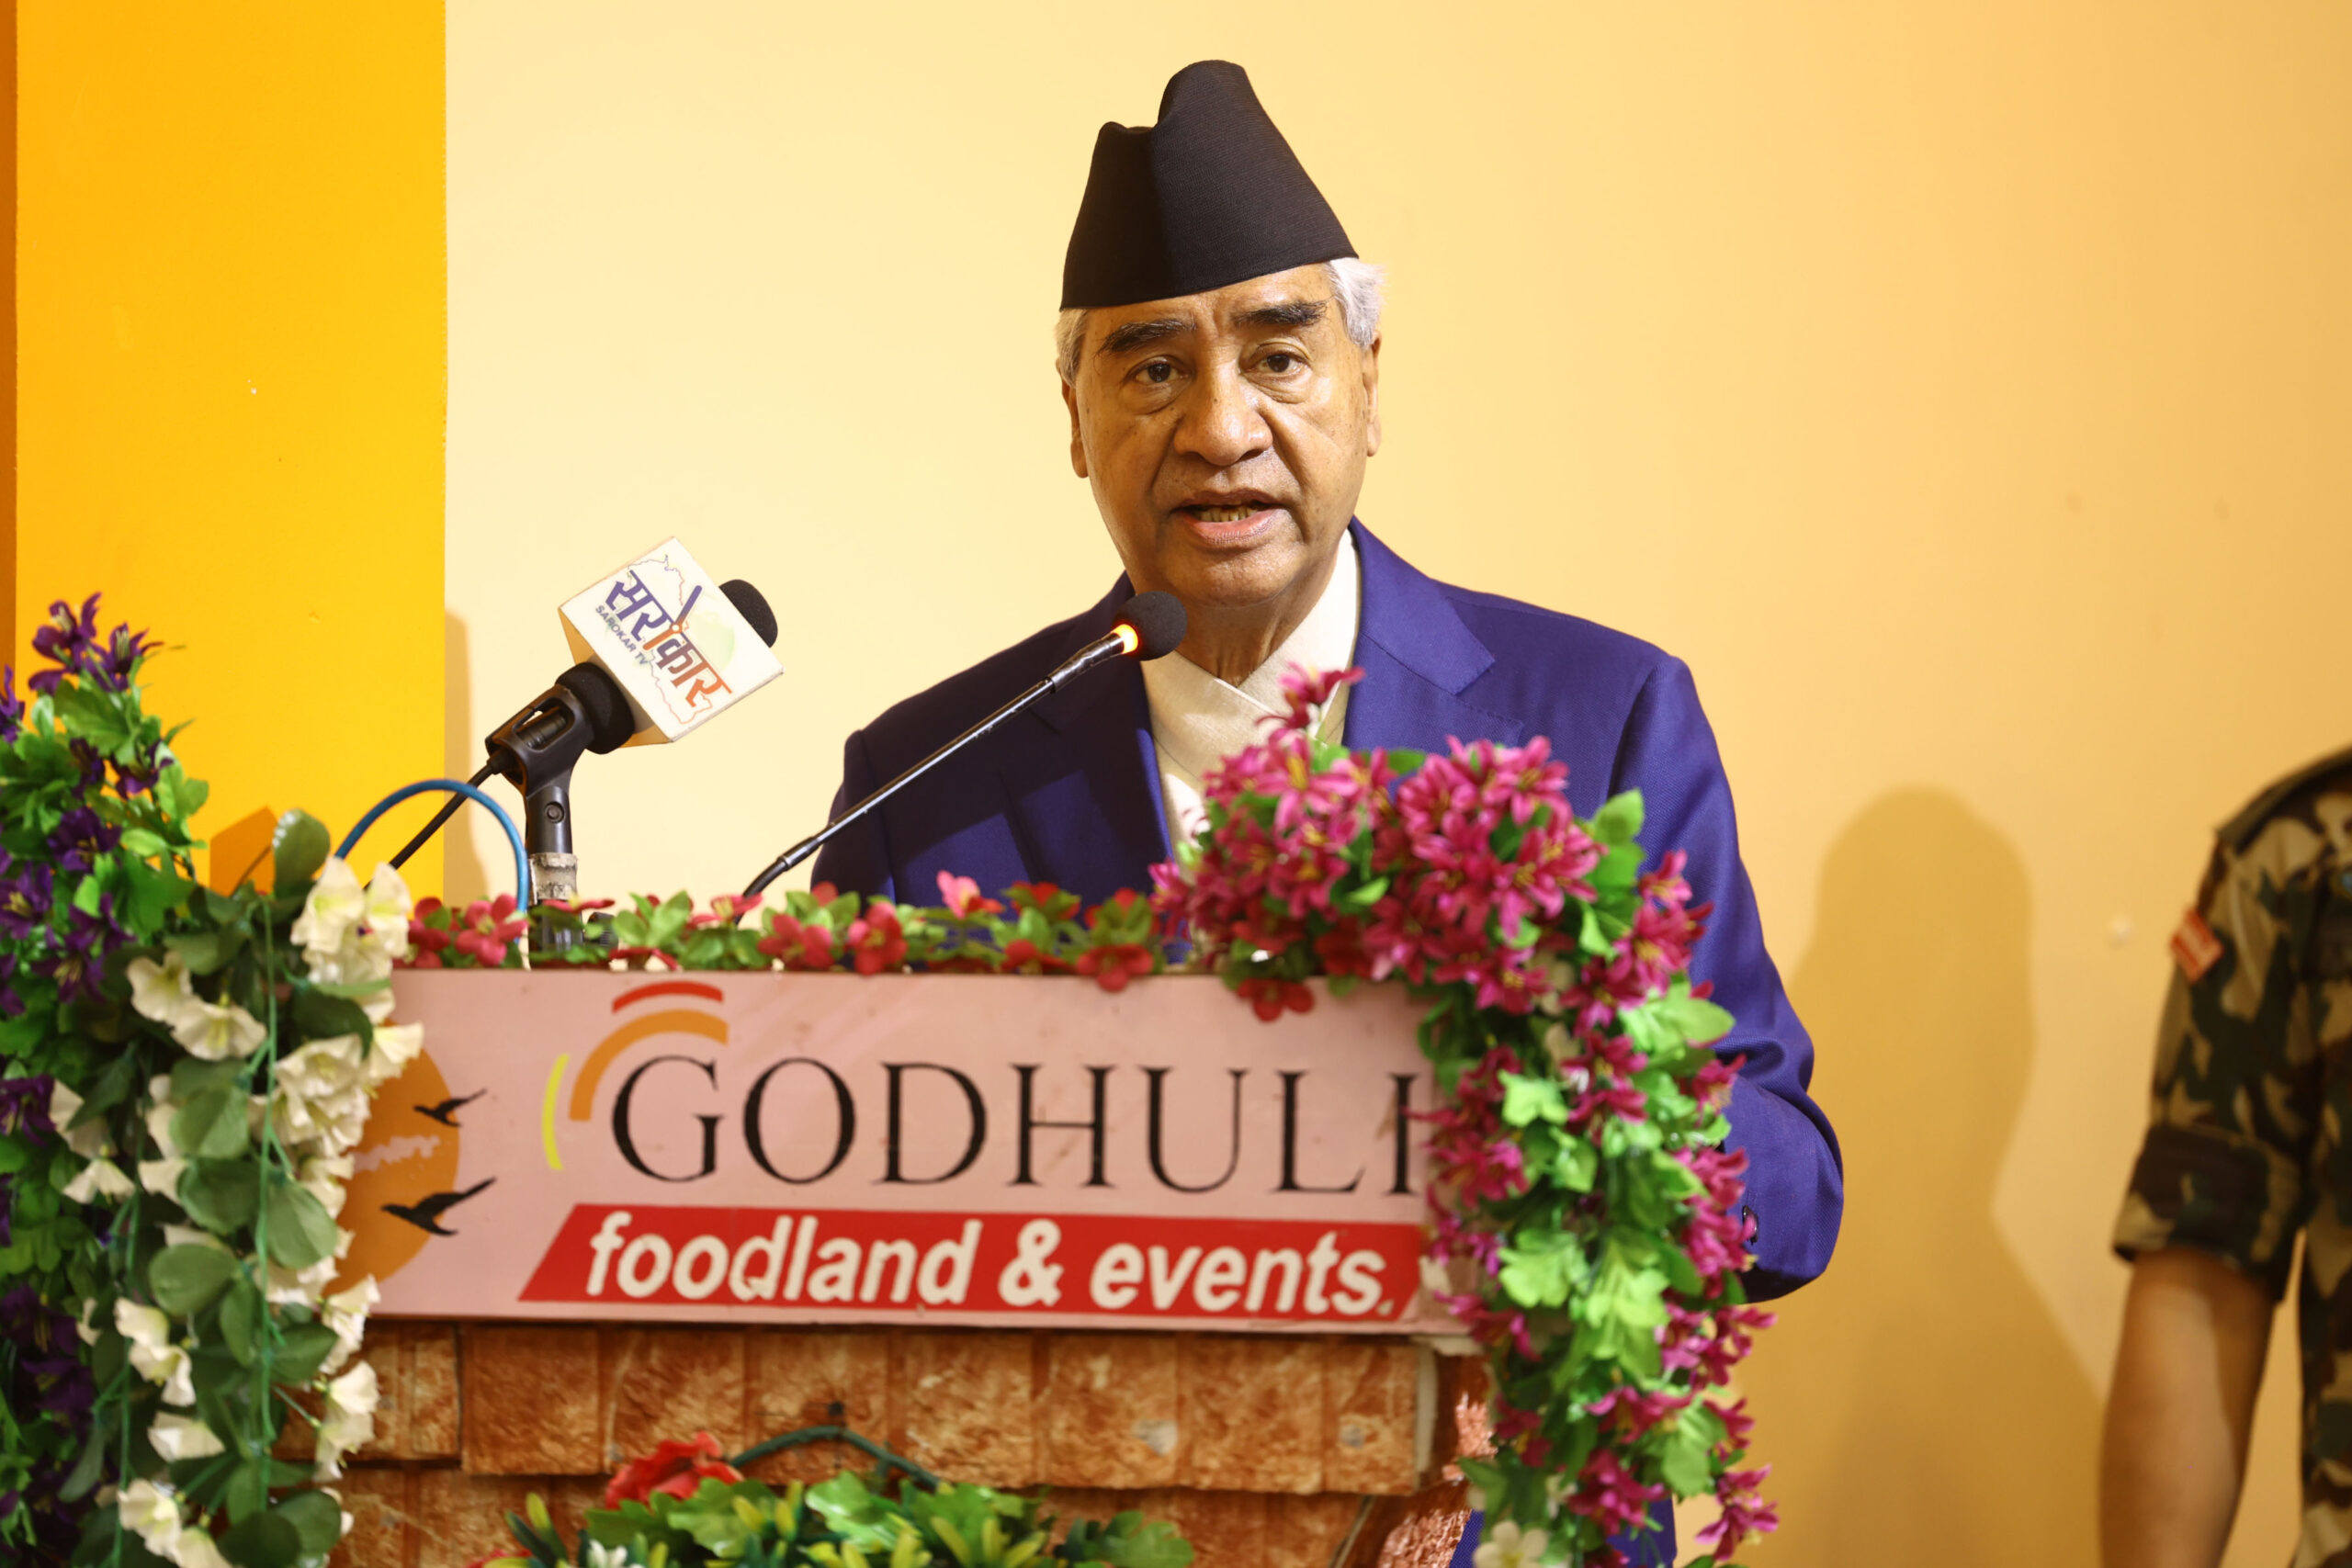 Today’s need is to consolidate national unity: PM Deuba